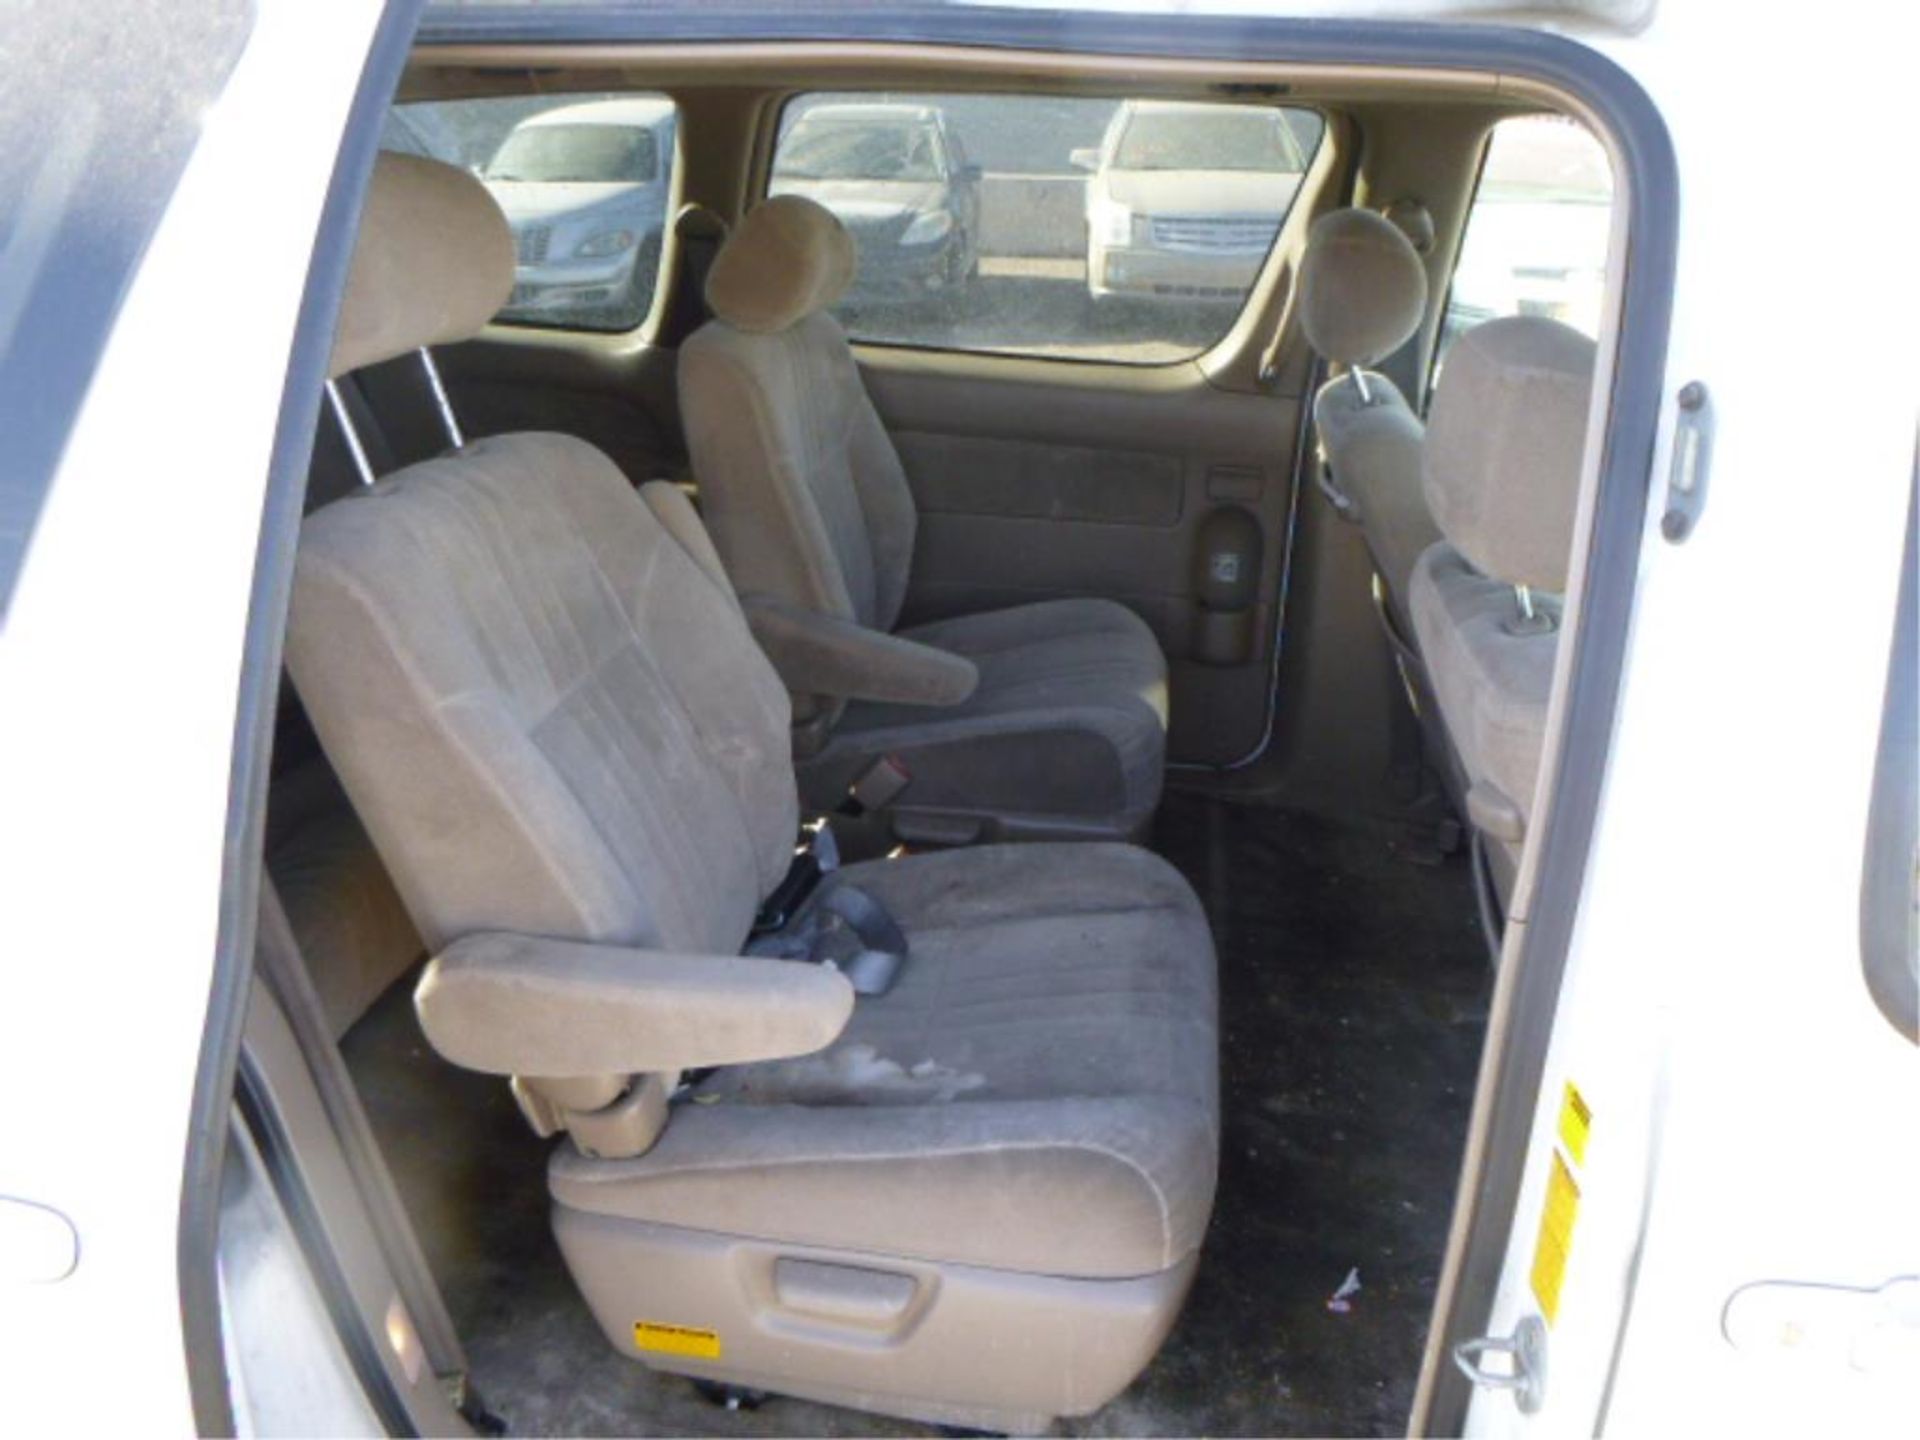 (Lot # 3462) 2003 Toyota Sienna - Image 9 of 15